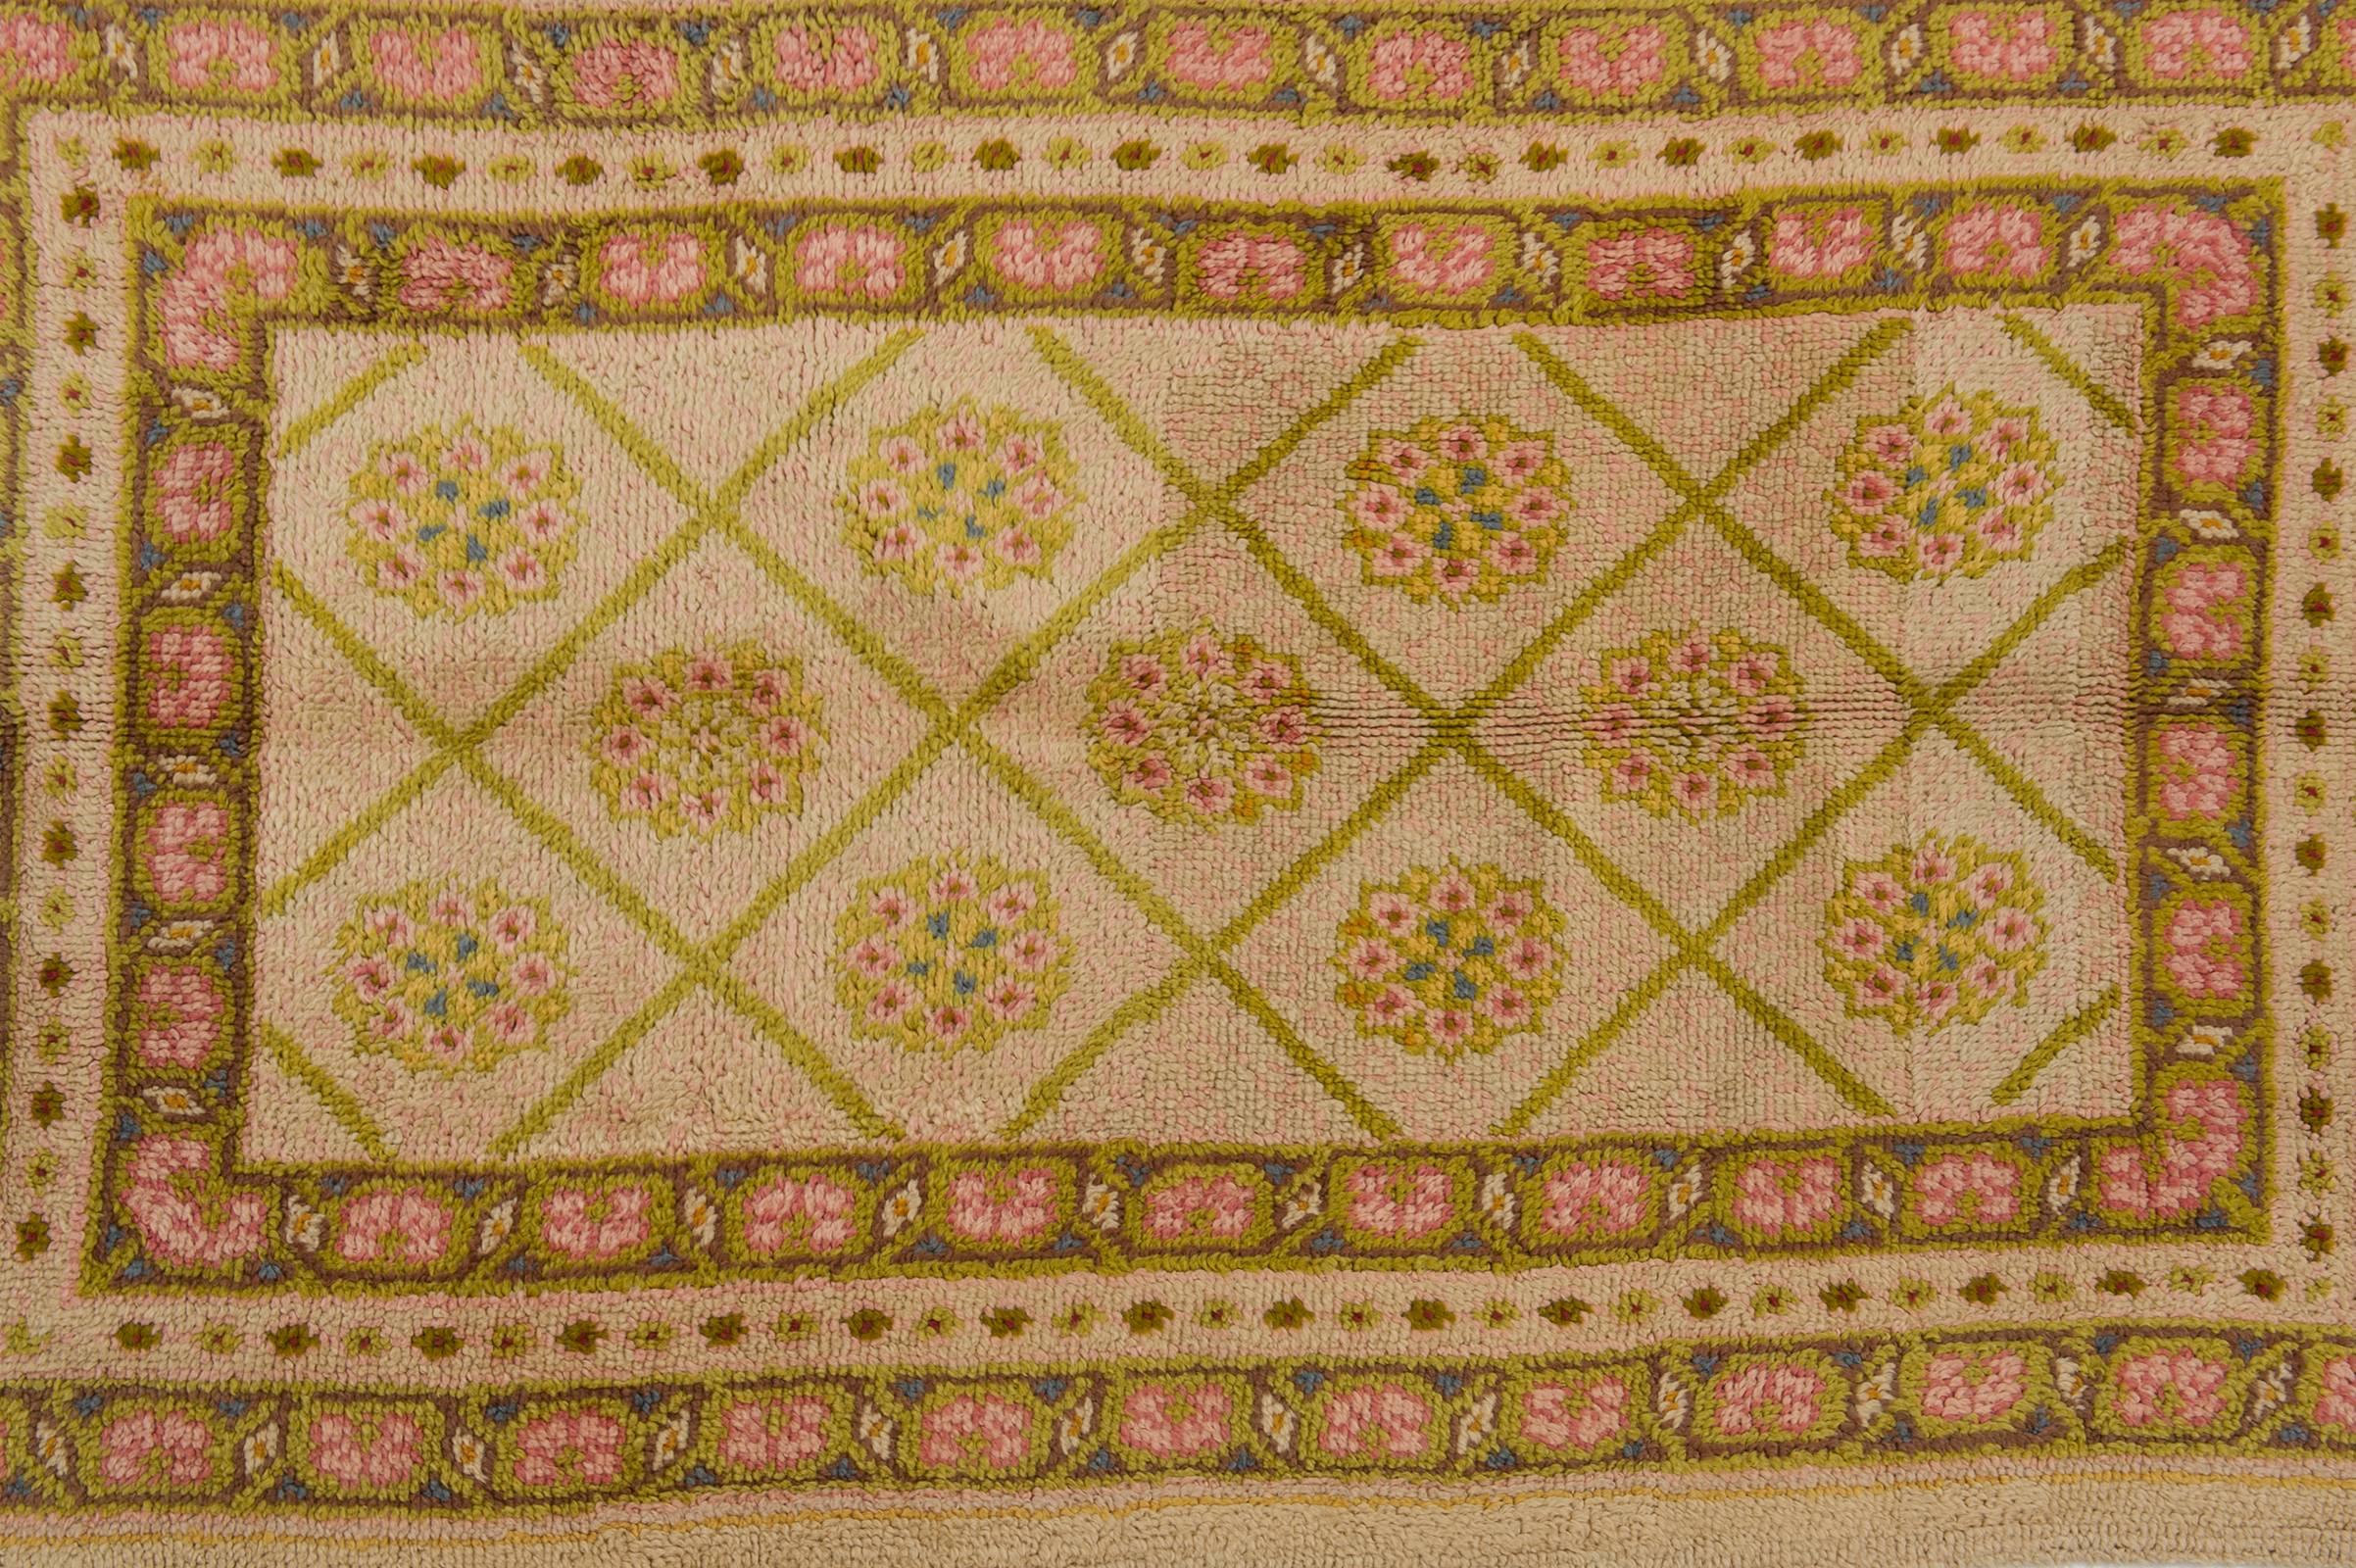 nr. 1344 -  Pretty vintage 1950s Italian rug with soft wool  and pastel colors (more beautiful up close)
A good idea for Christmas time.